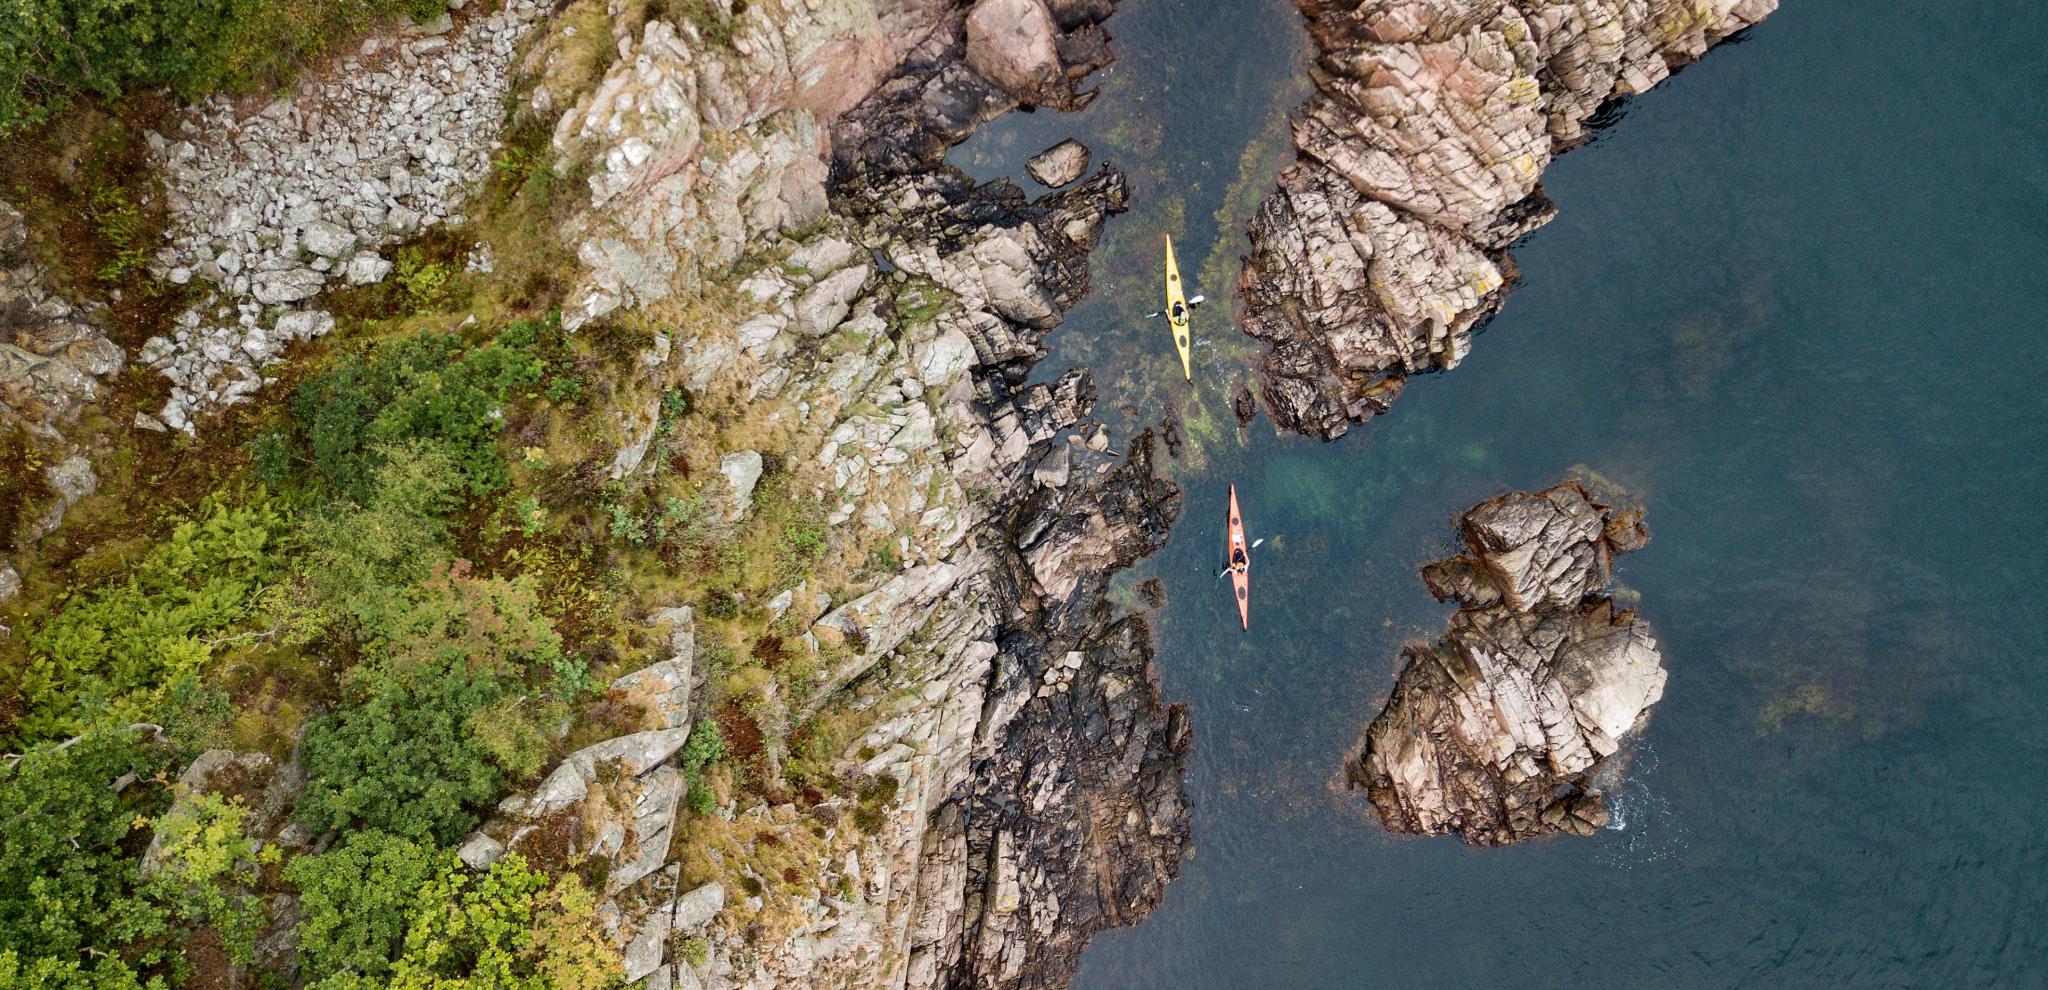 View from above of a canoe docking in archipelago at Kullaberg